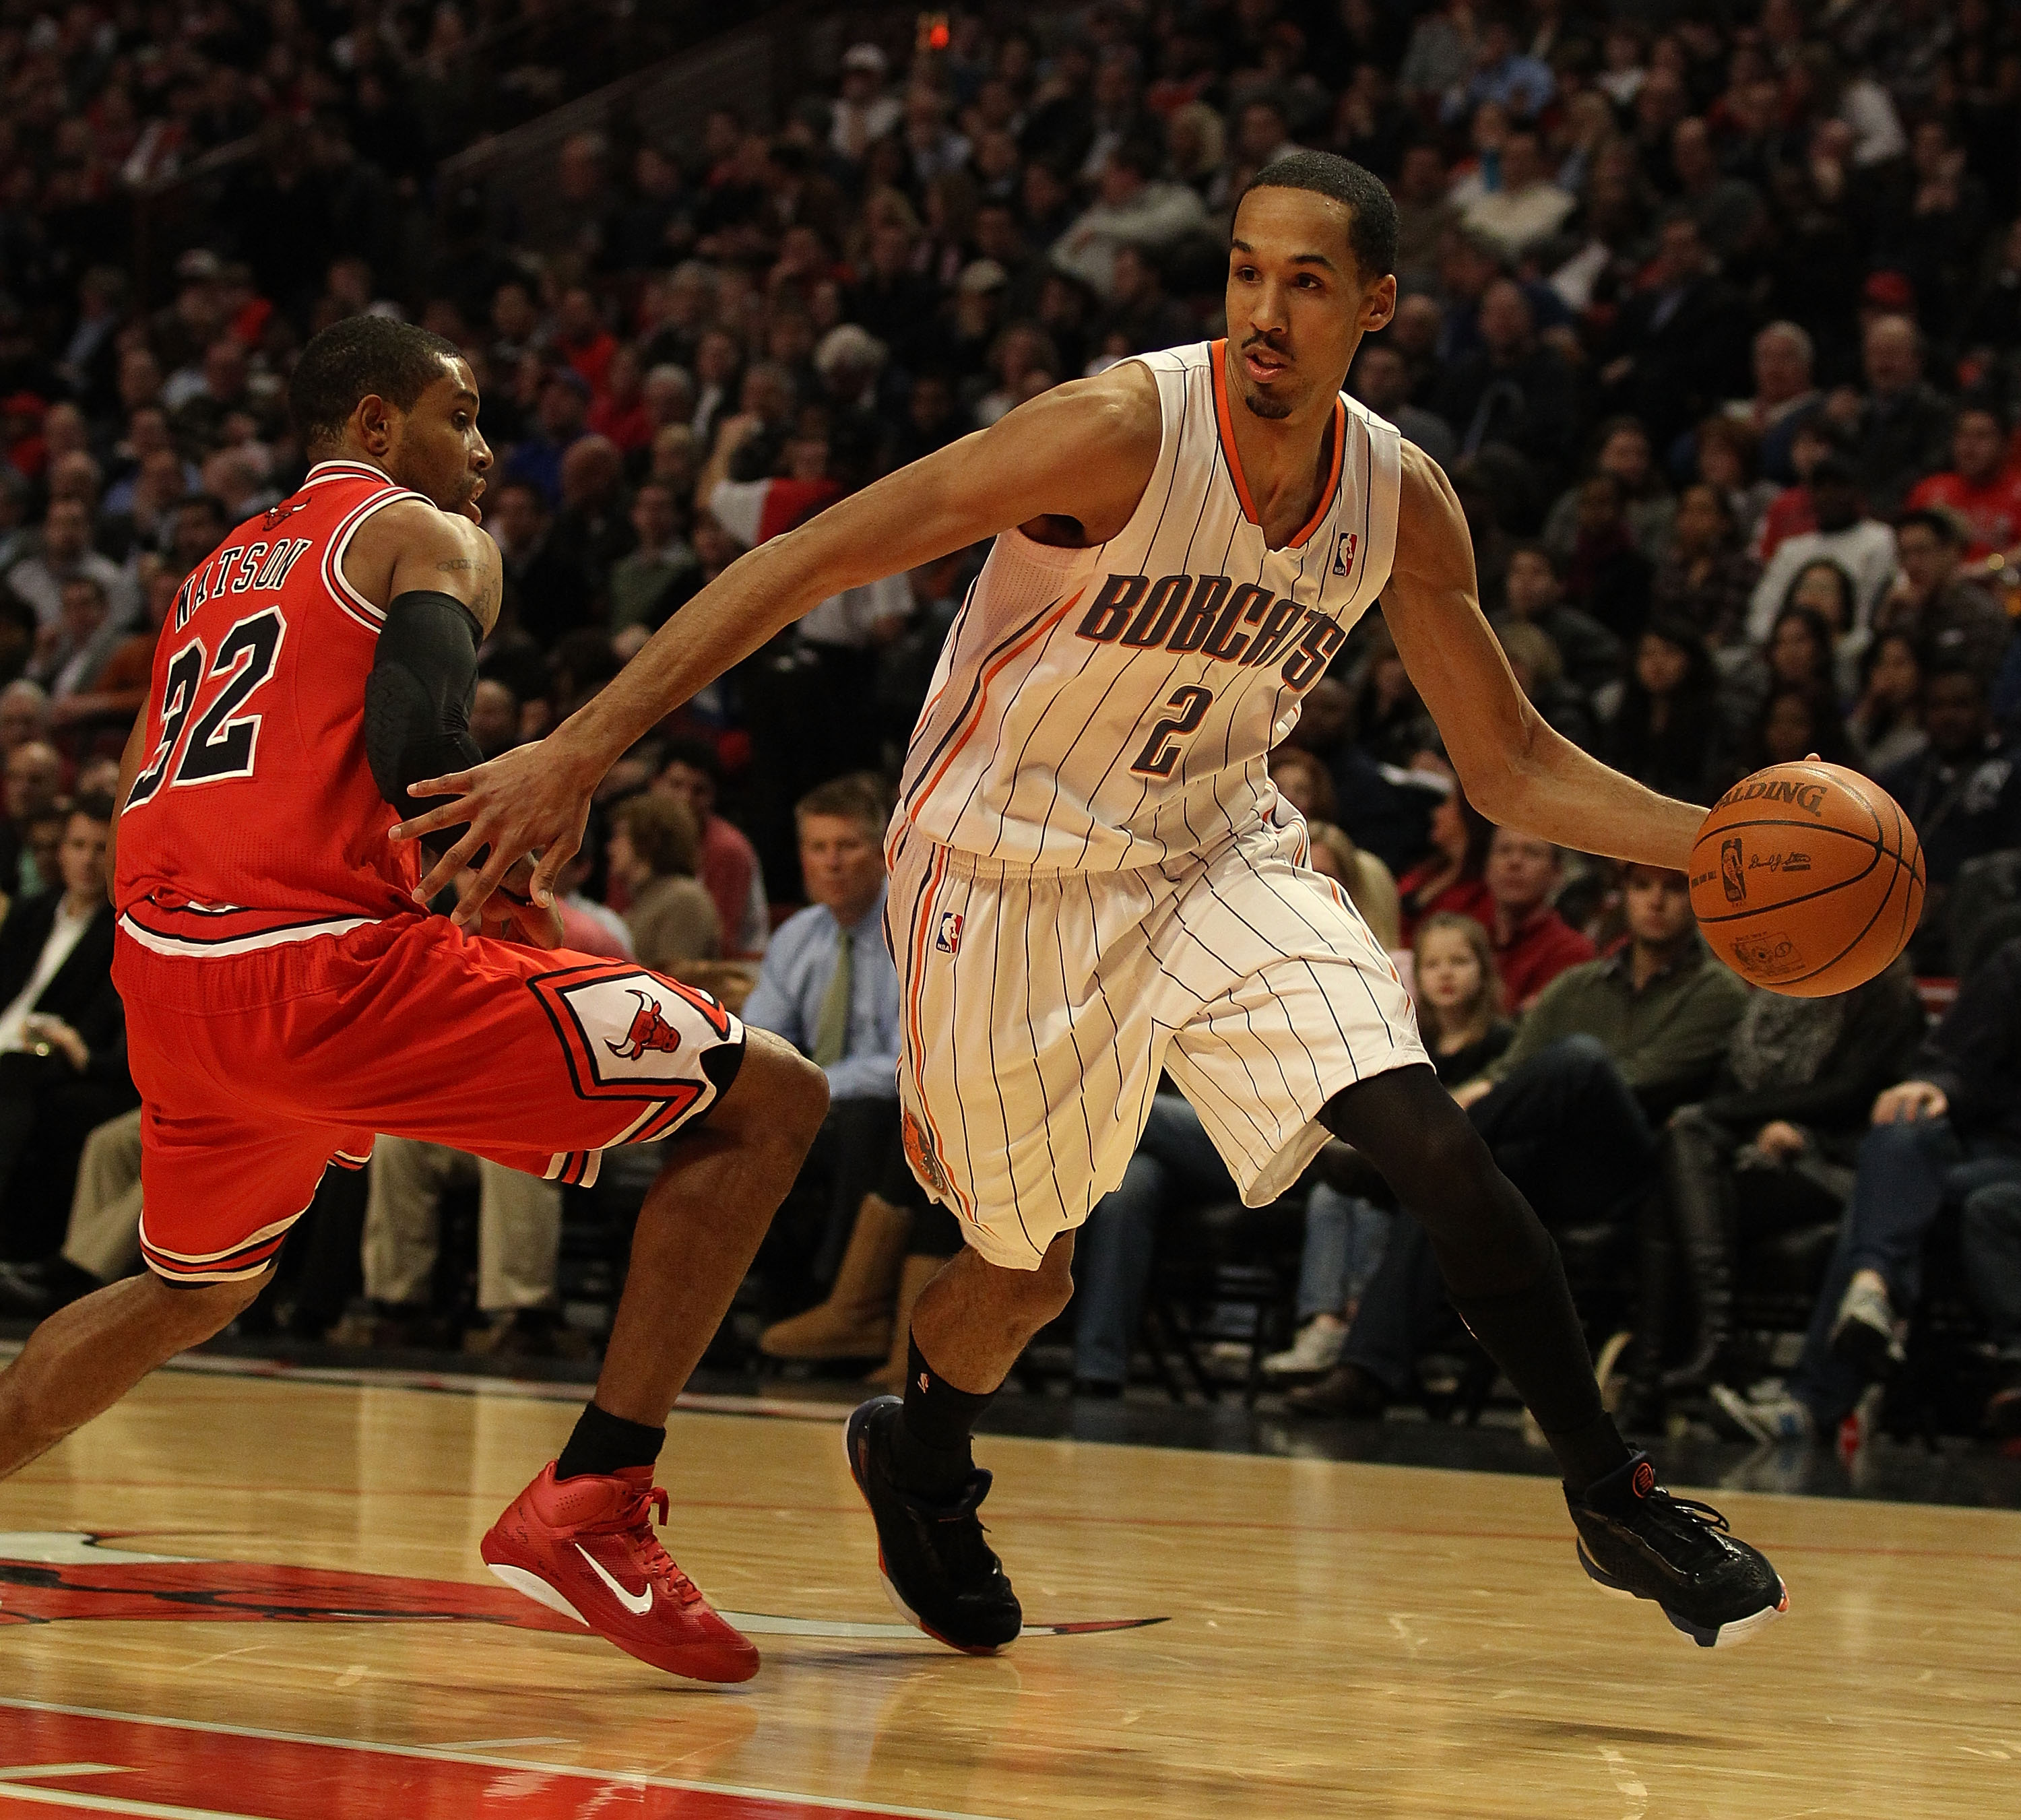 CHICAGO, IL - FEBRUARY 15: Shaun Livingston #2 of the Charlotte Bobcats moves around C.J. Watson #32 of the Chicago Bulls at the United Center on February 15, 2011 in Chicago, Illinois. The Bulls defeated the Bobcats 106-94. NOTE TO USER: User expressly a